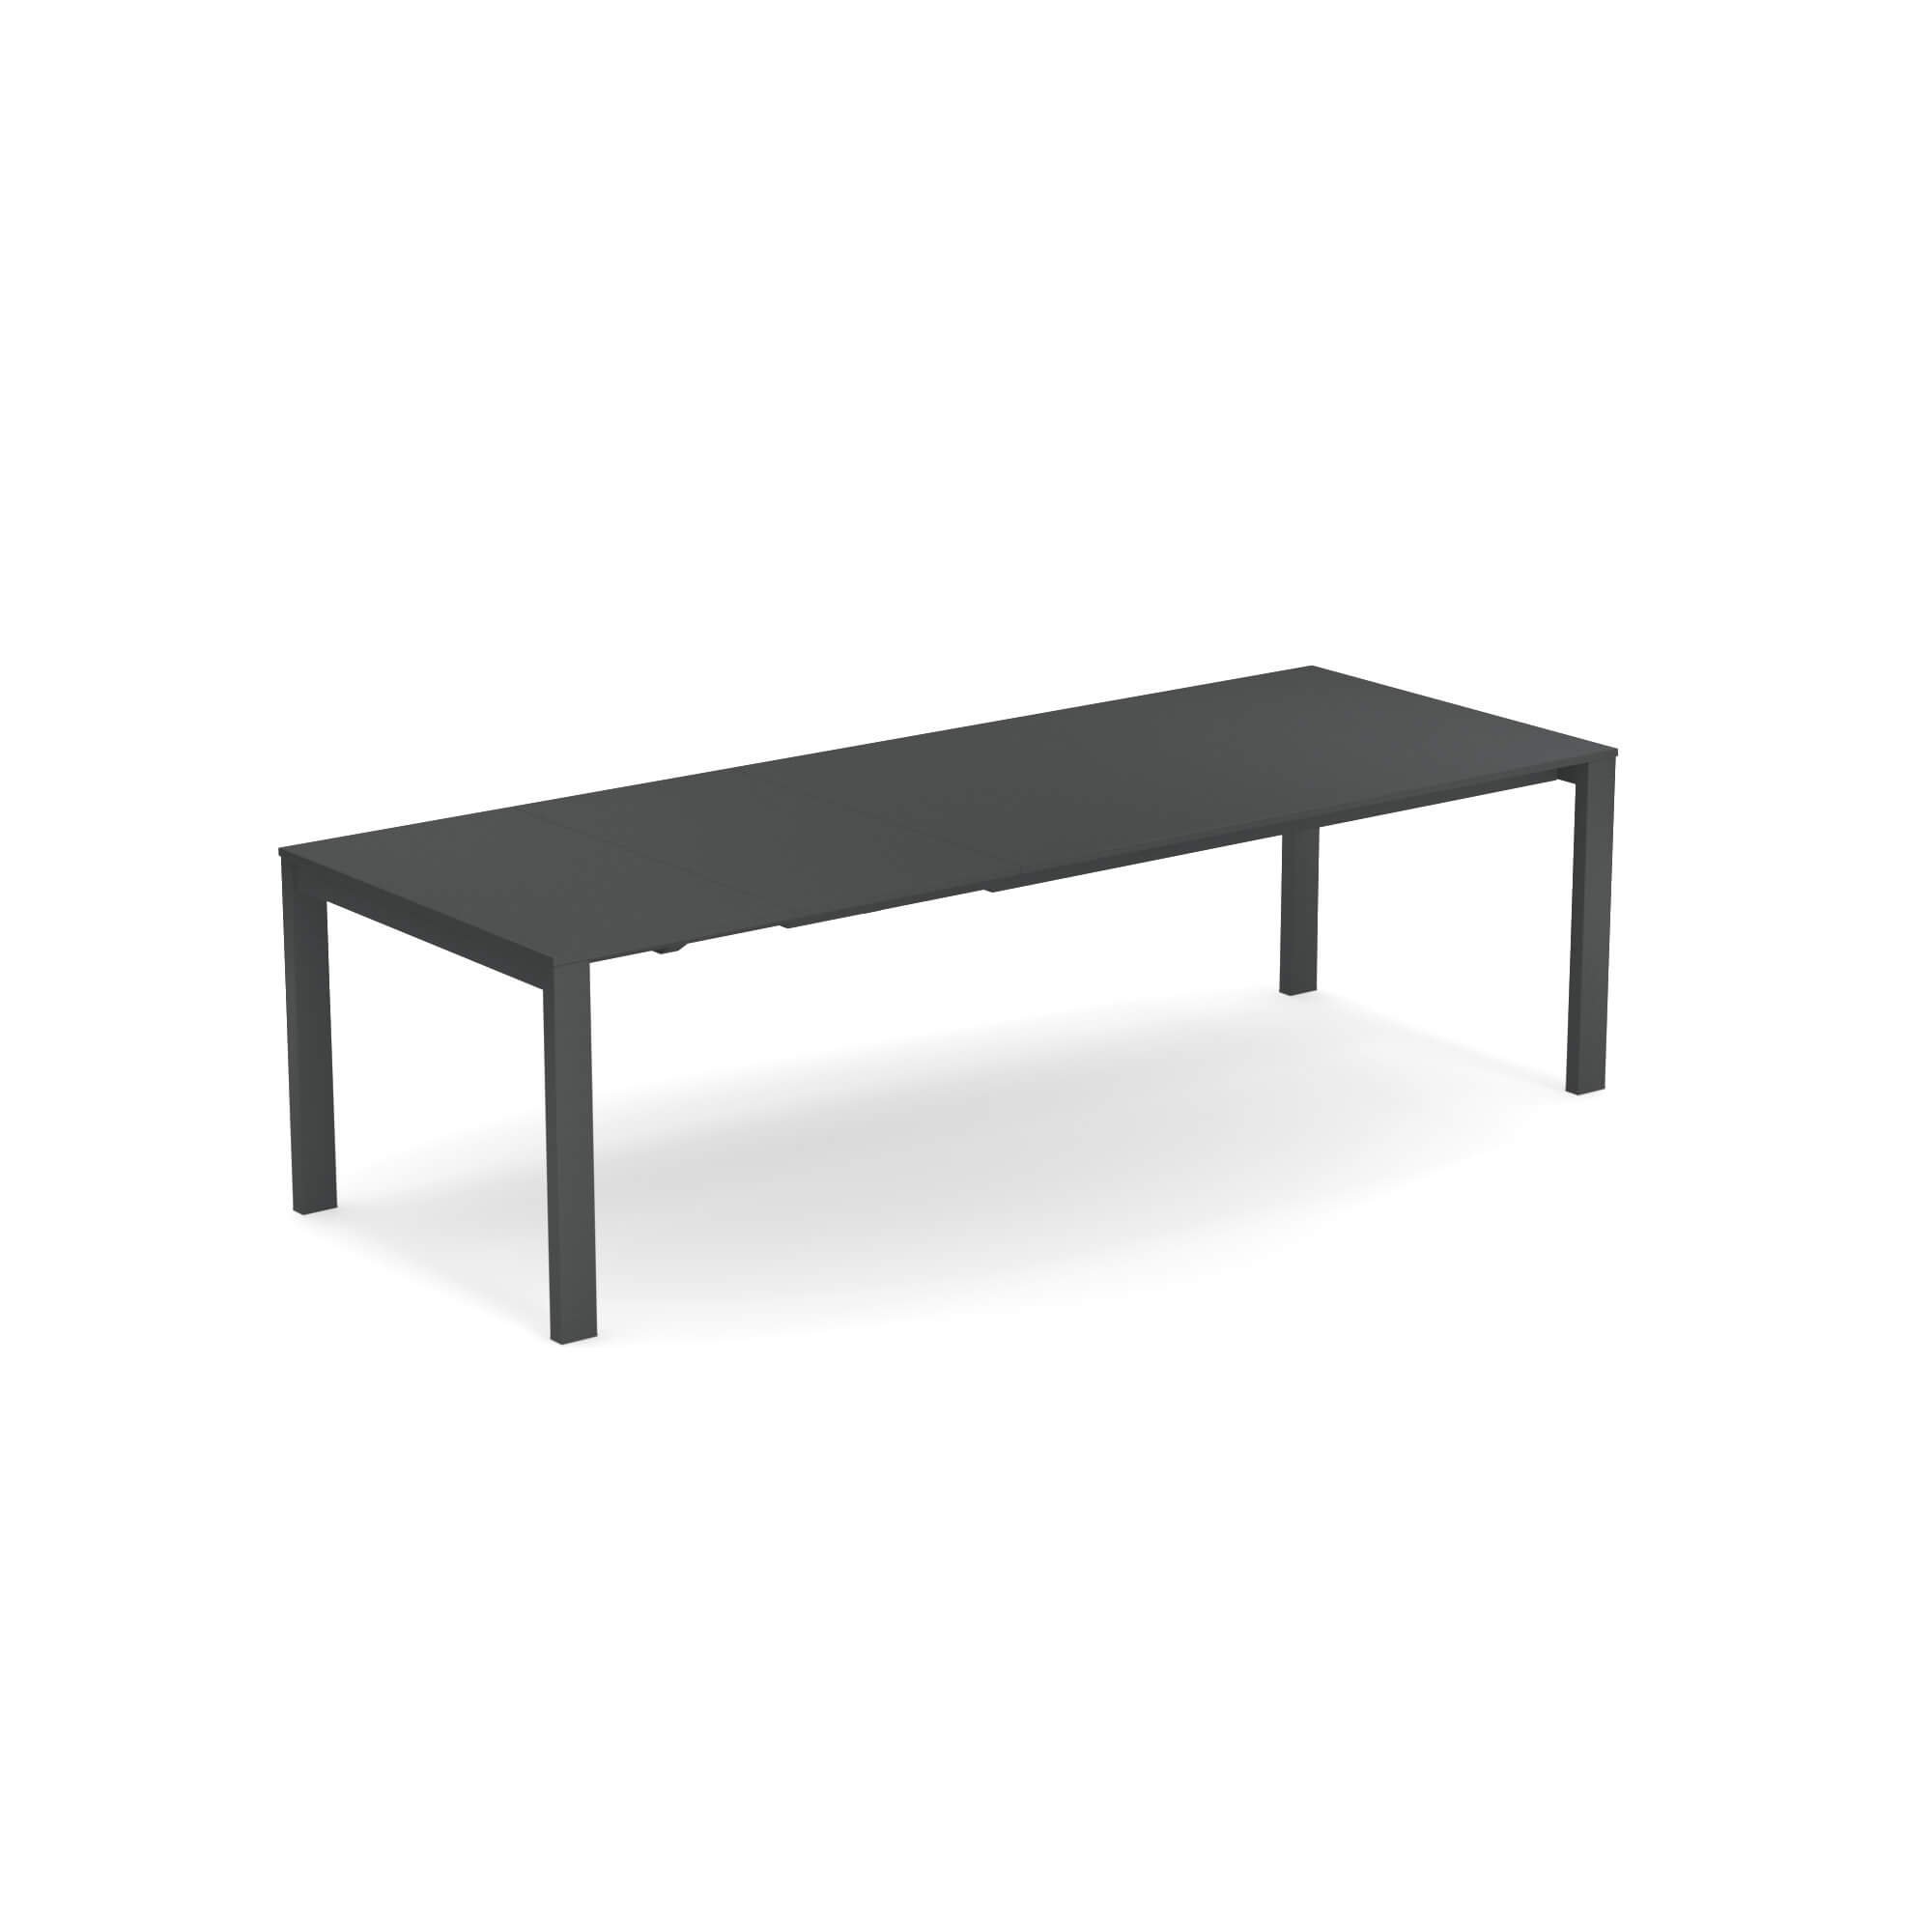 Round Extensible Table dining from Emu, designed by Christophe Pillet